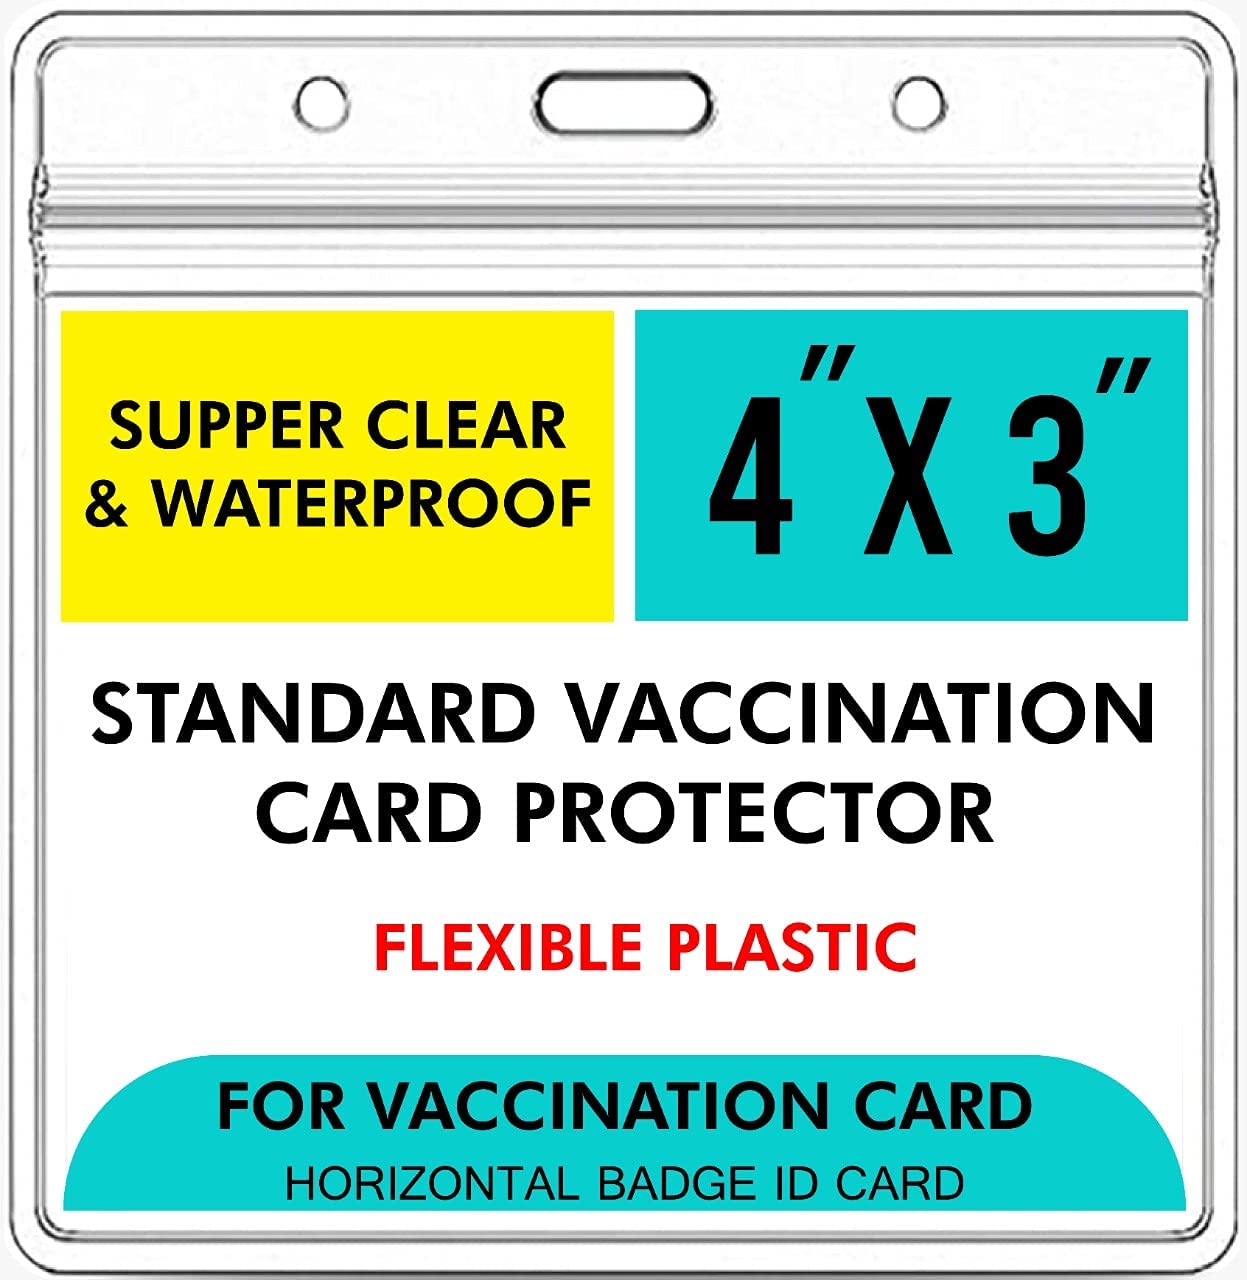 Vaccine Card Protector & Holder (2 Pack + 2 Lanyard, 4 x 3 in) Vaccination Card Protector 4x3 Immunization ID Card Name Badge Holder Waterproof with